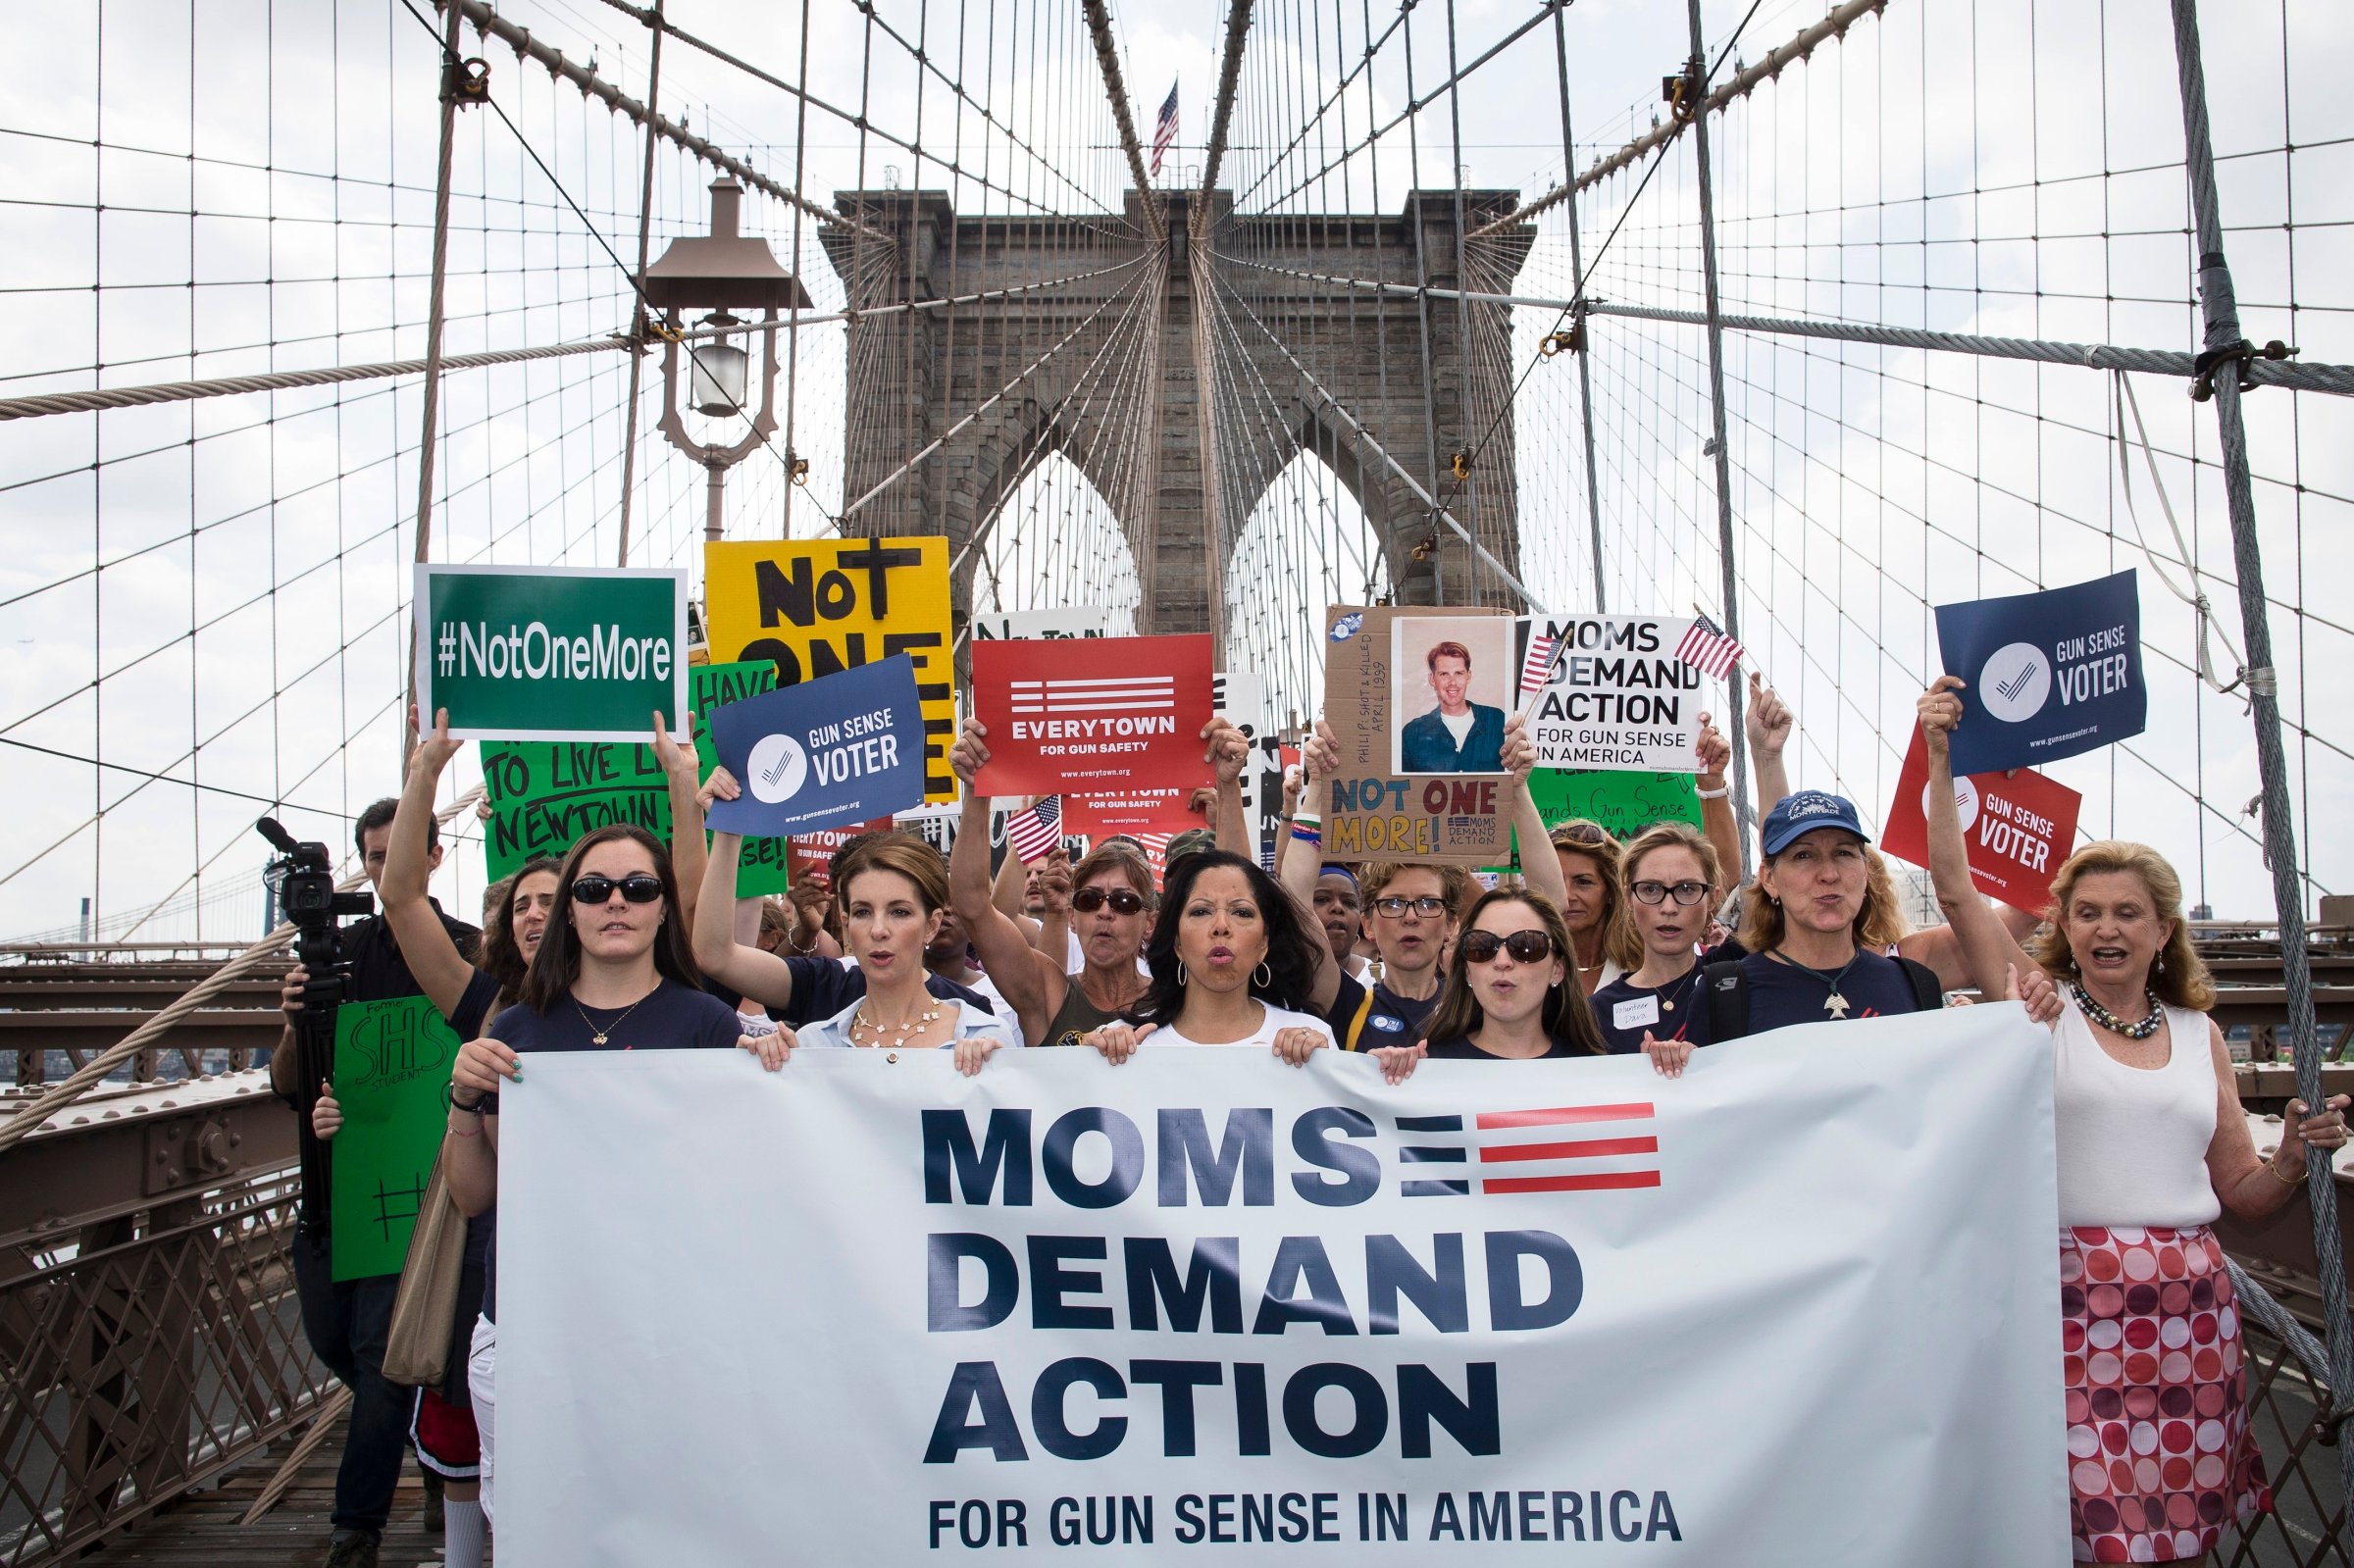 Hundreds of demonstrators march across the Brooklyn Bridge to call for tougher gun control laws, Saturday, June 14, 2014, in New York.